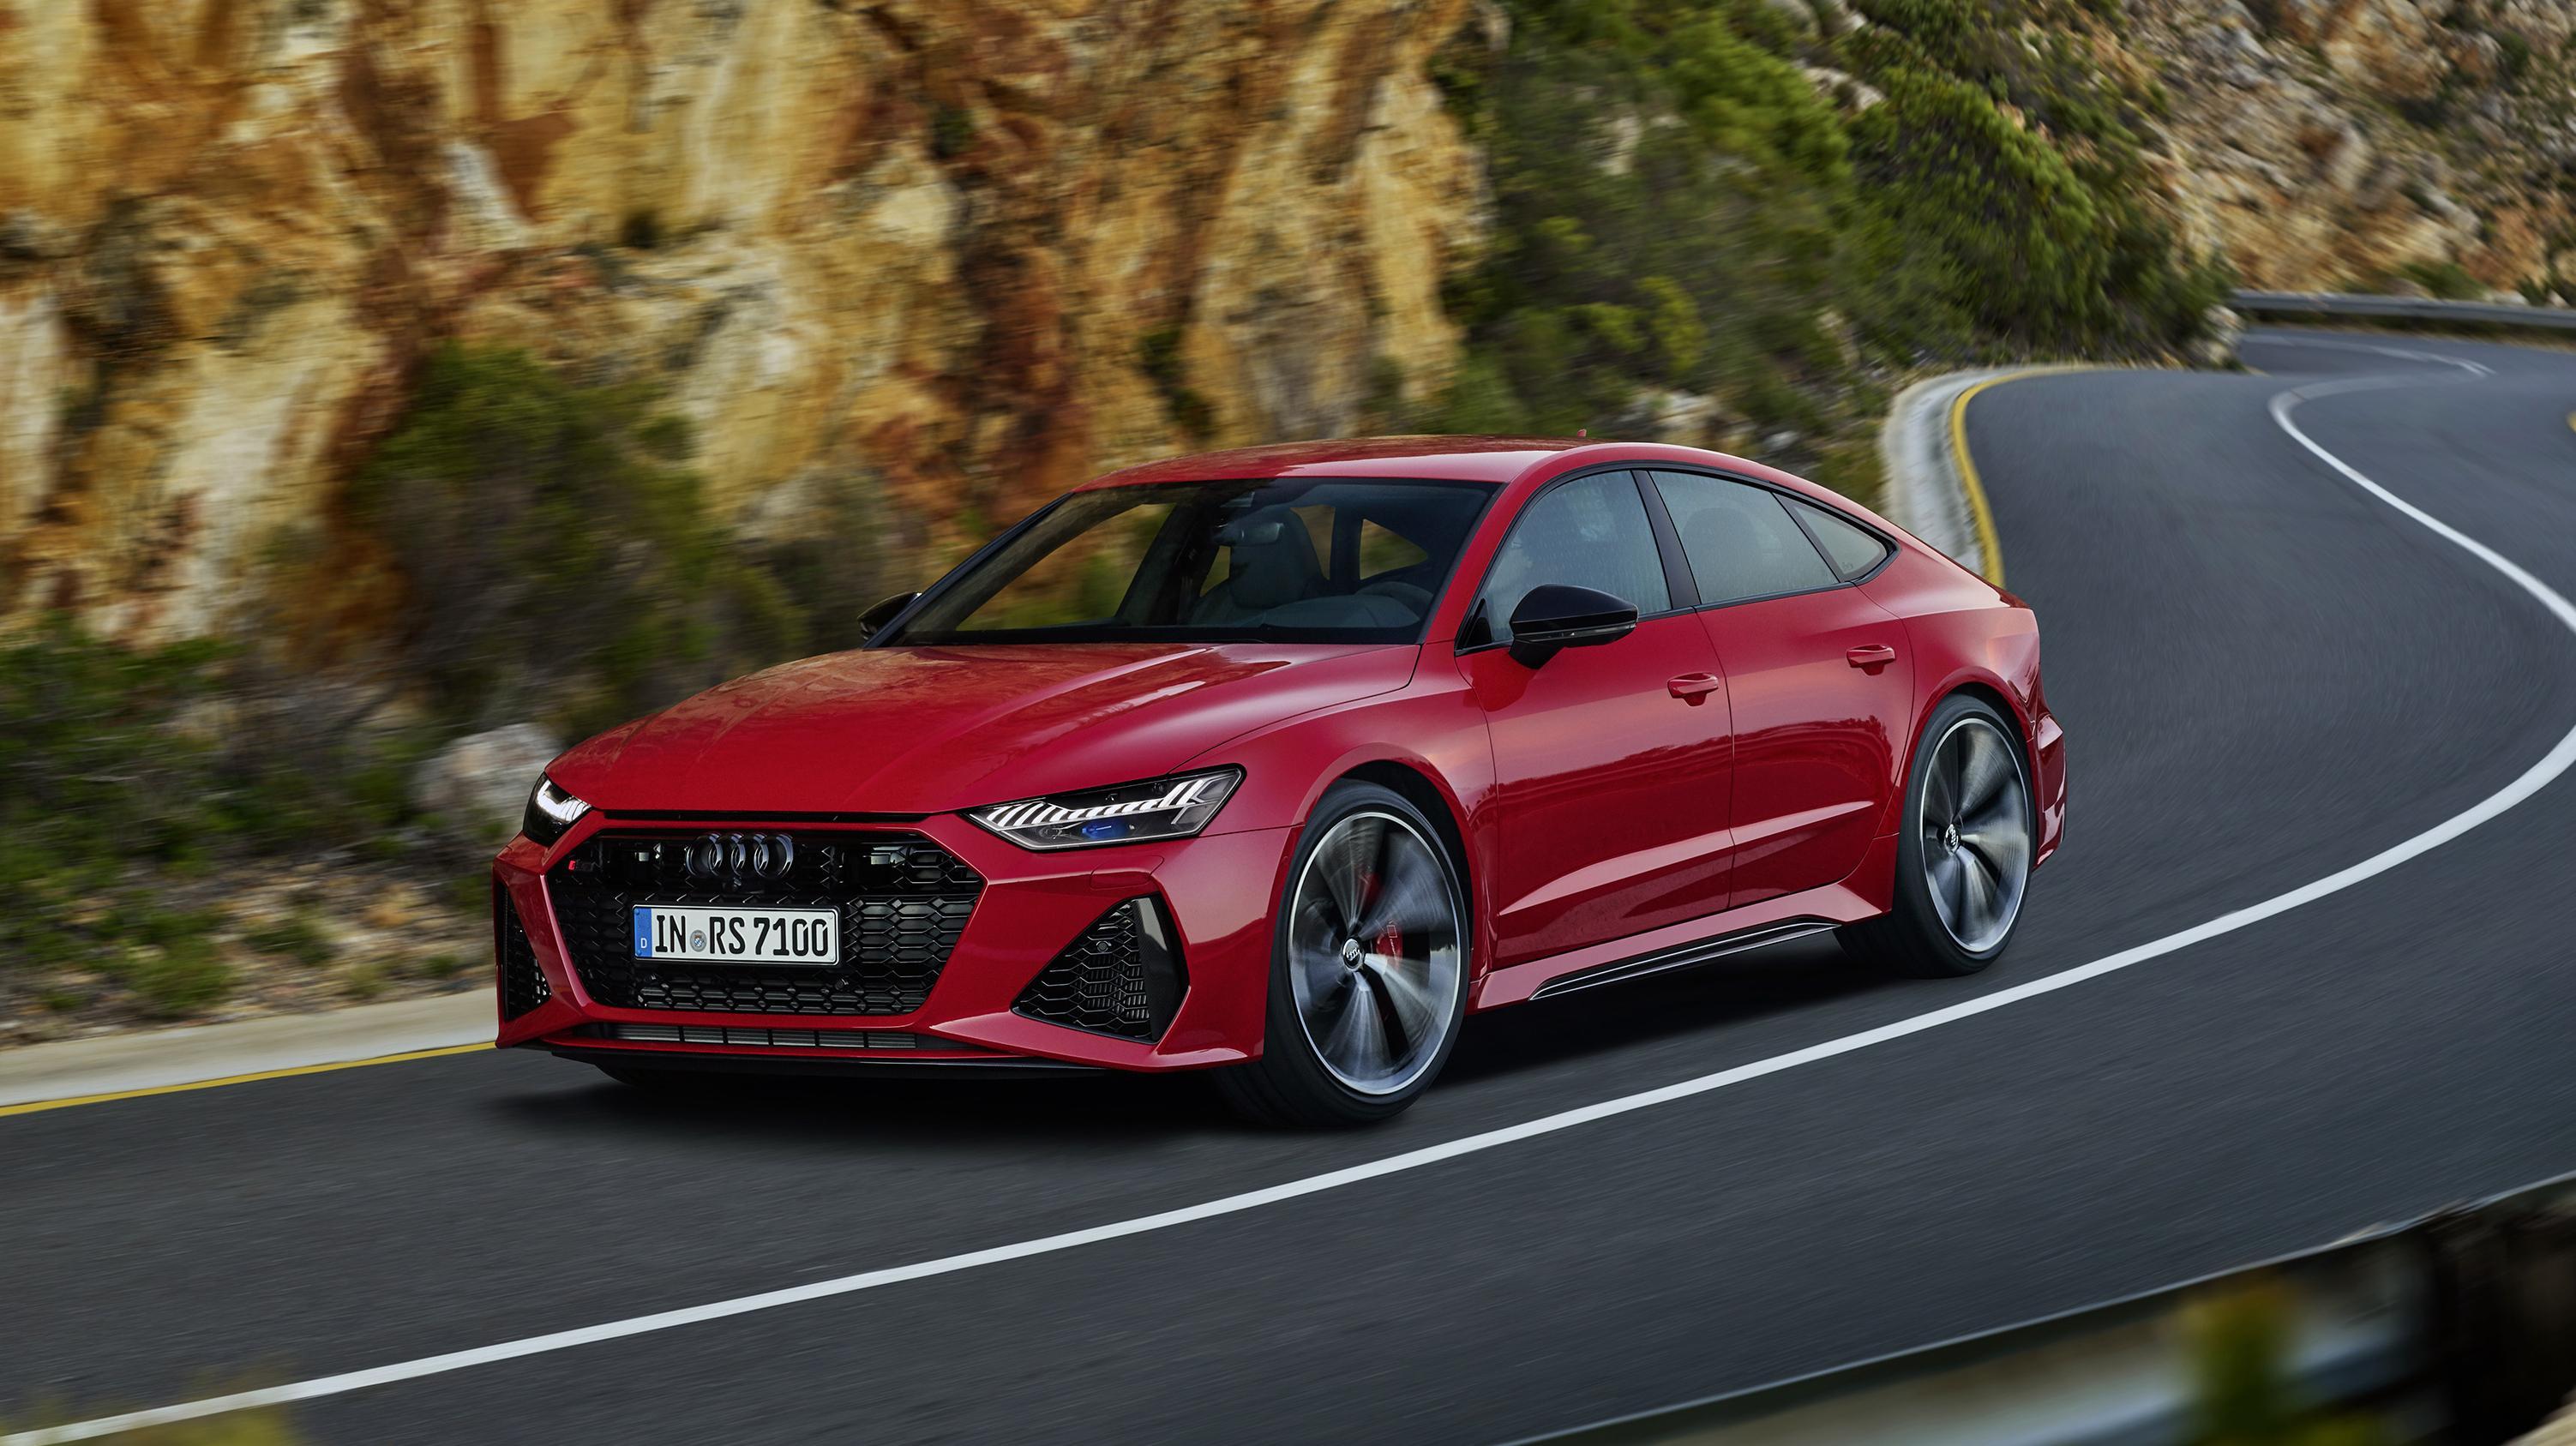 Wallpaper Of The Day: 2020 Audi RS7